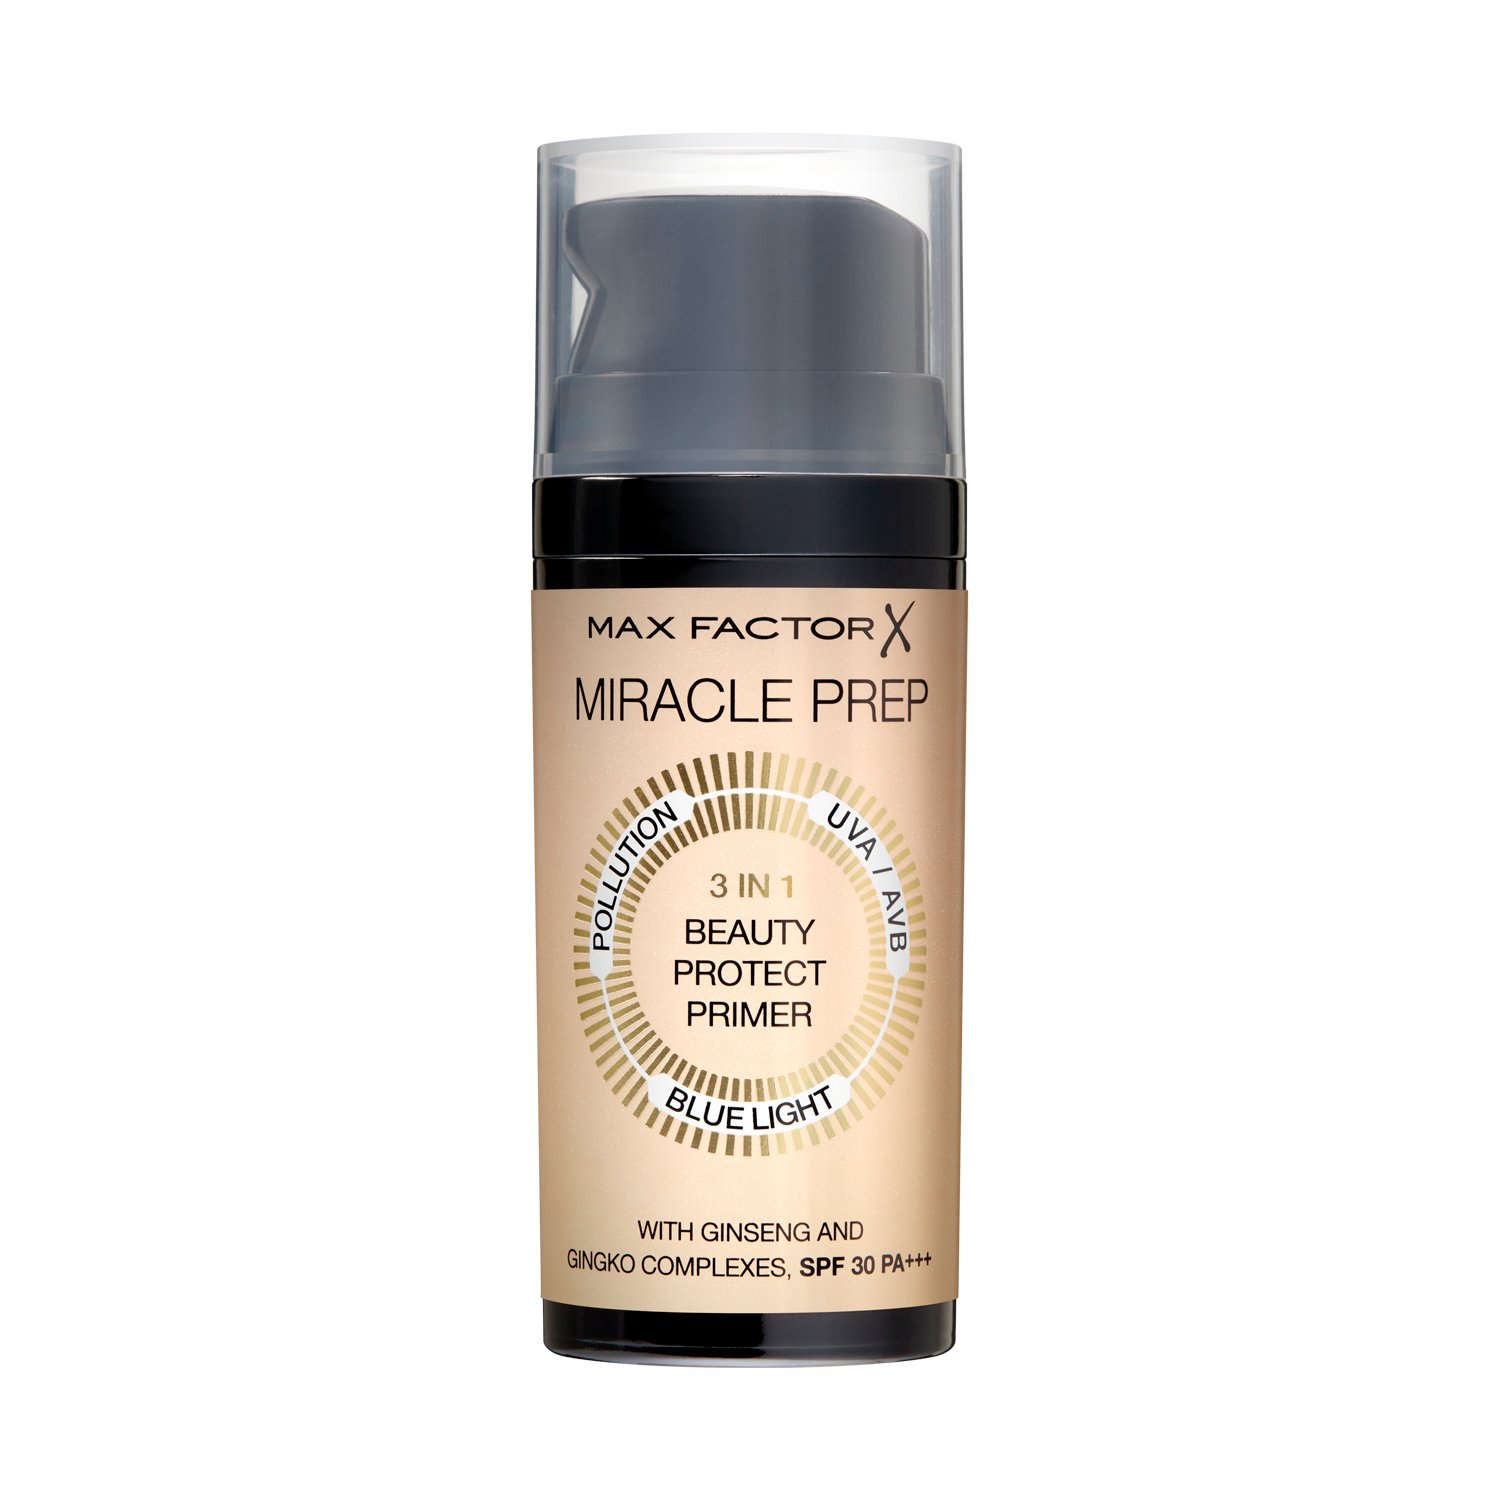 Основа под макияж Max Factor Miracle Prep 3 in 1 Beauty Protect Primer, SPF 30, 30 мл (8000018966810) - фото 1